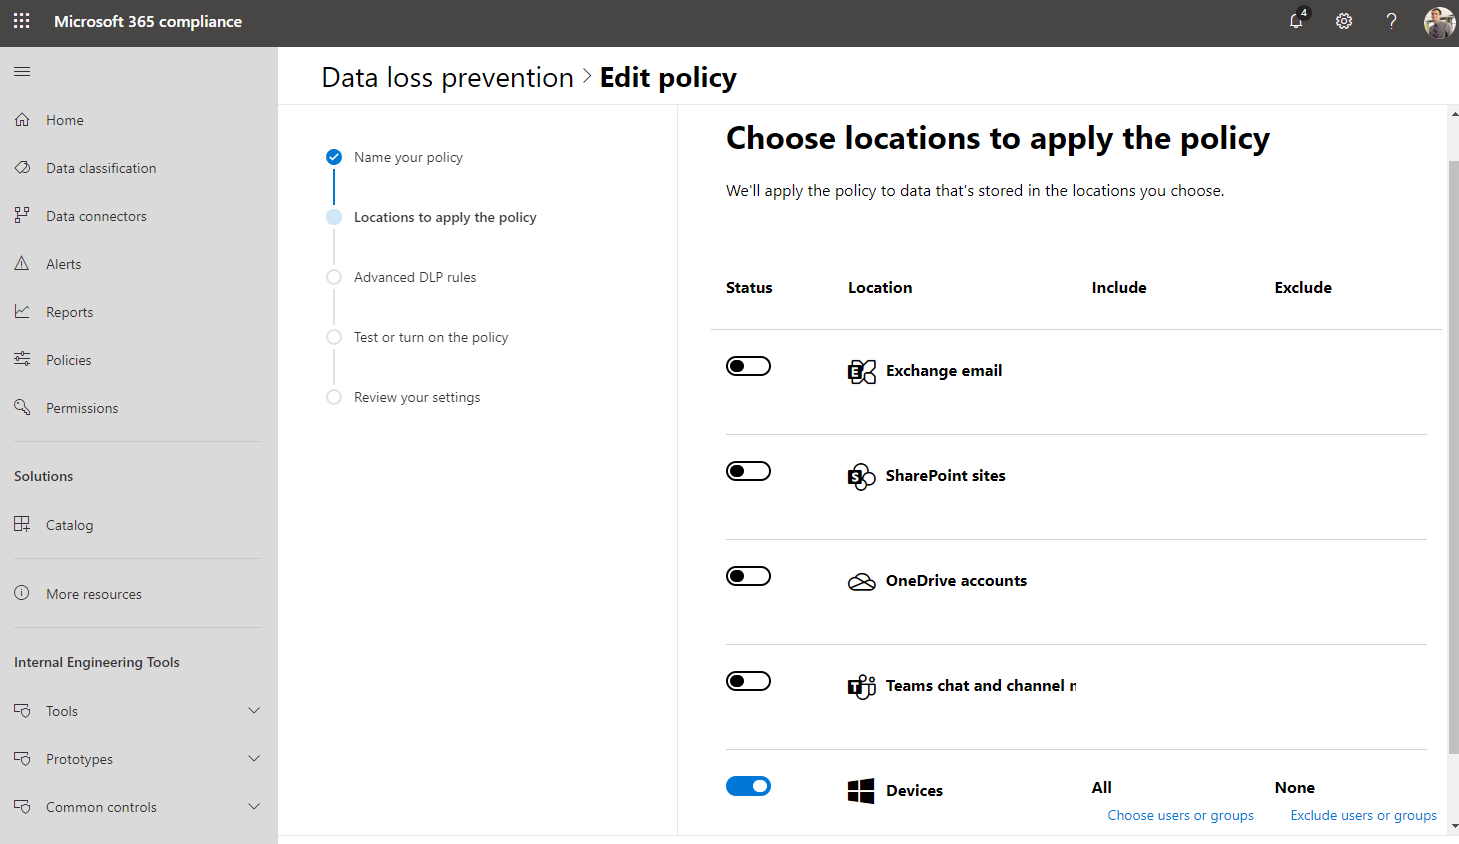 An image showing how you can manage your data loss prevention policies across Microsoft 365 from one location – the Microsoft 365 compliance center.